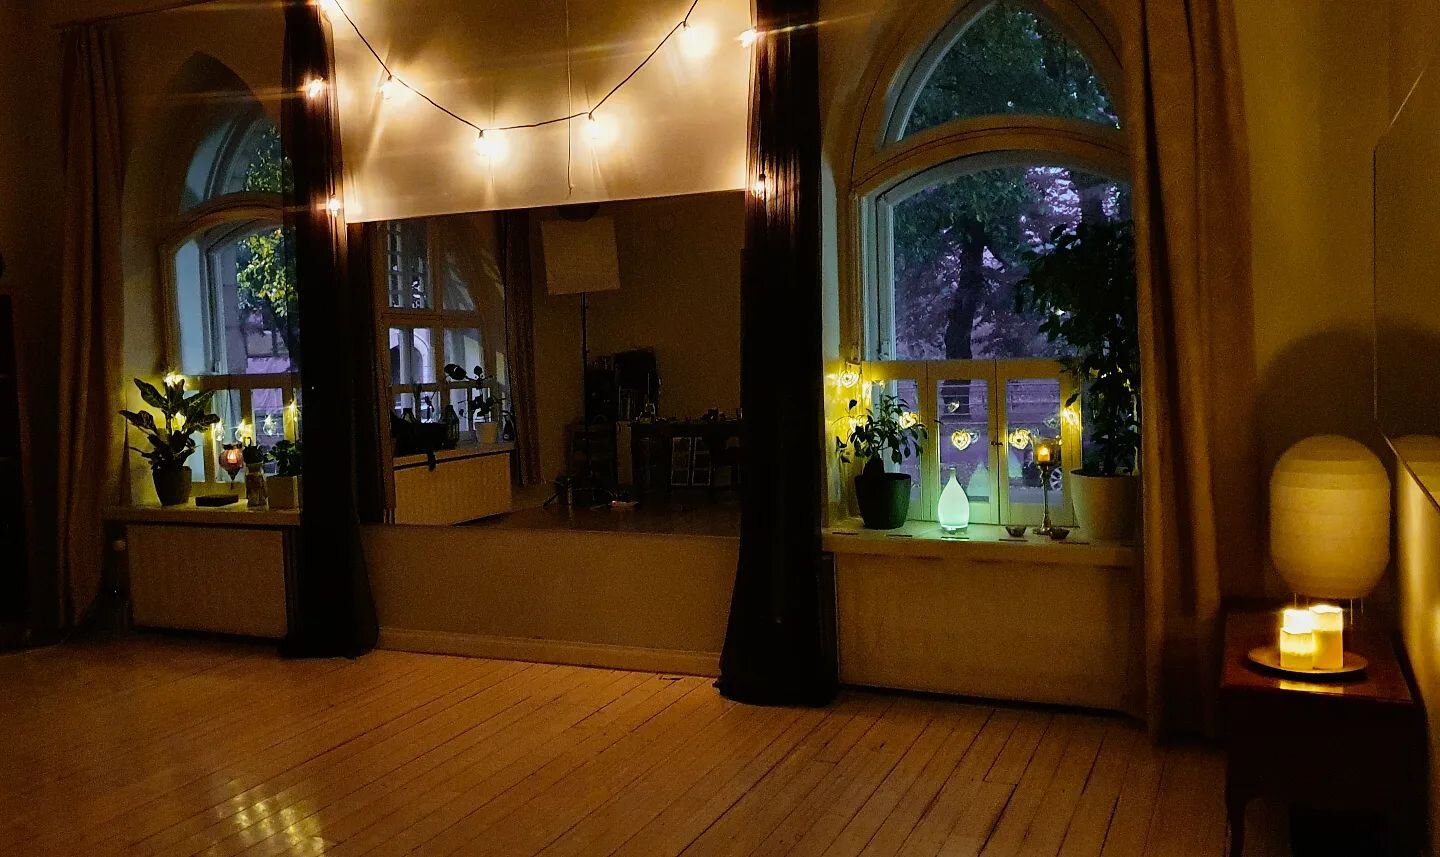 As the autumn nights darken, my studio becomes this warm magical safe space with little fairy lights 💛
The house is literally called Moon Castle. How perfect is that? 😁🖤🌙 
Today I start classes with many new students in my beginners class! It mak